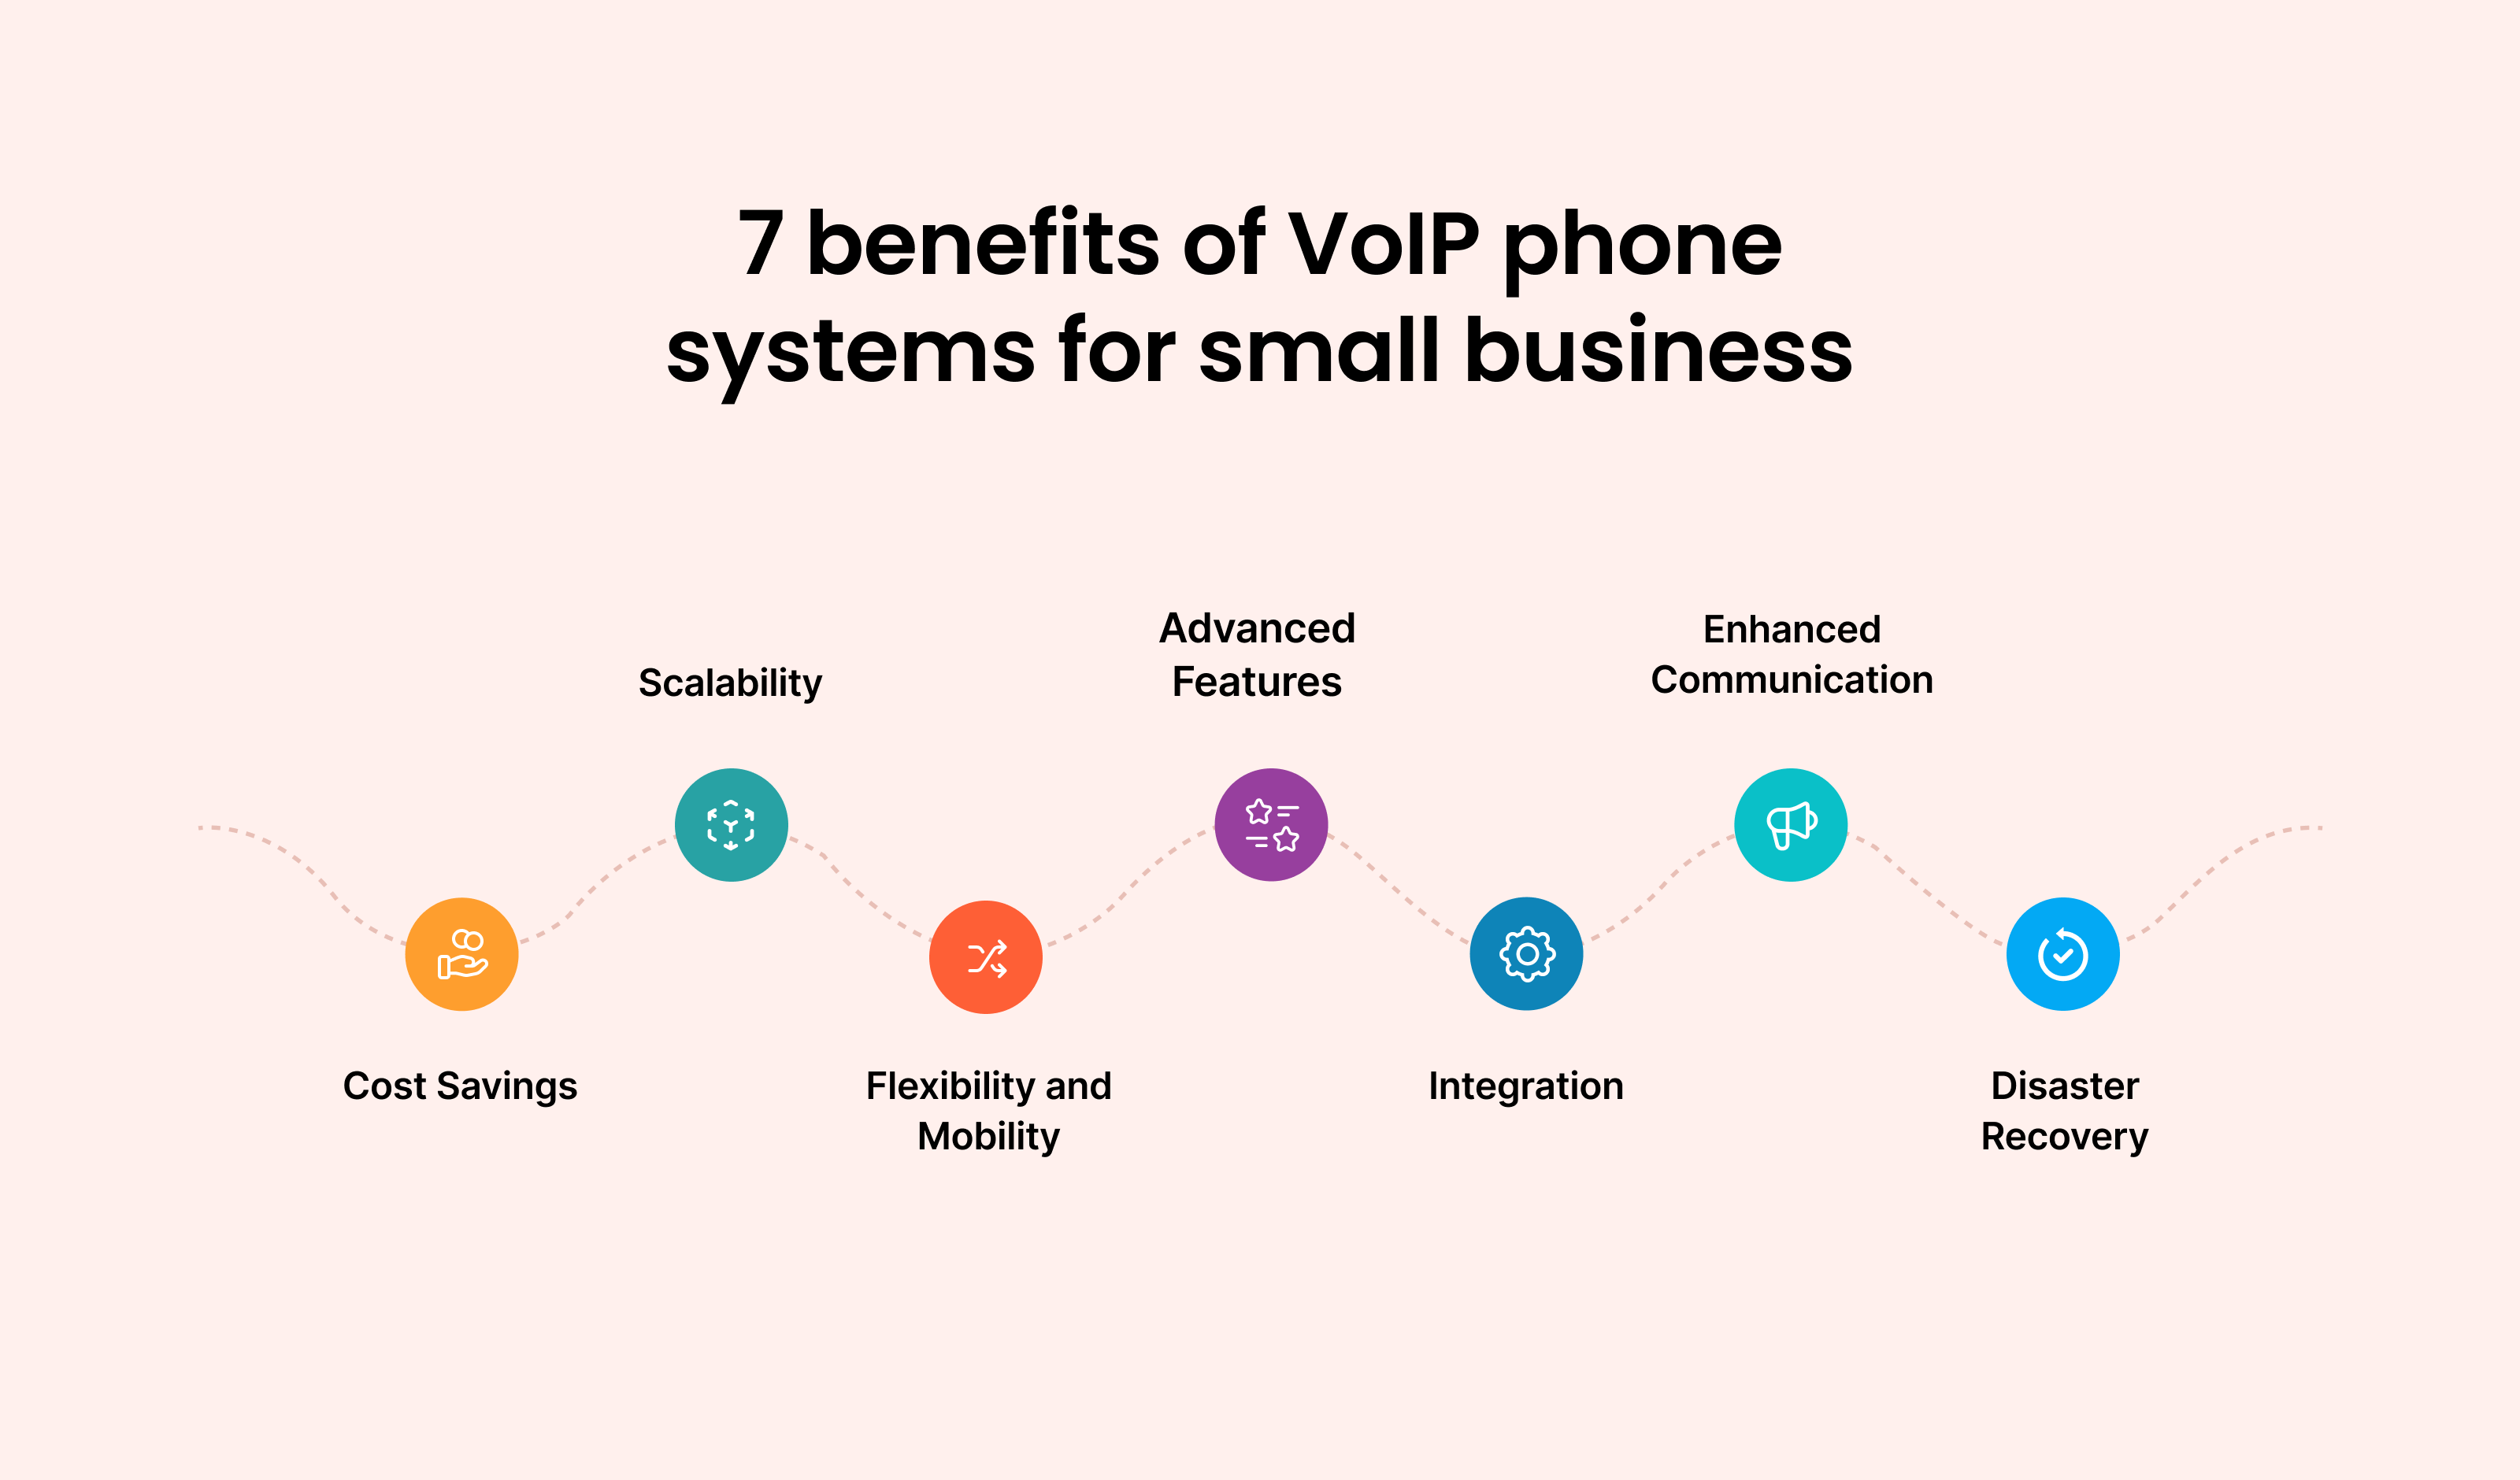 Top 7 Benefits of VoIP Phone Systems for Small Businesses